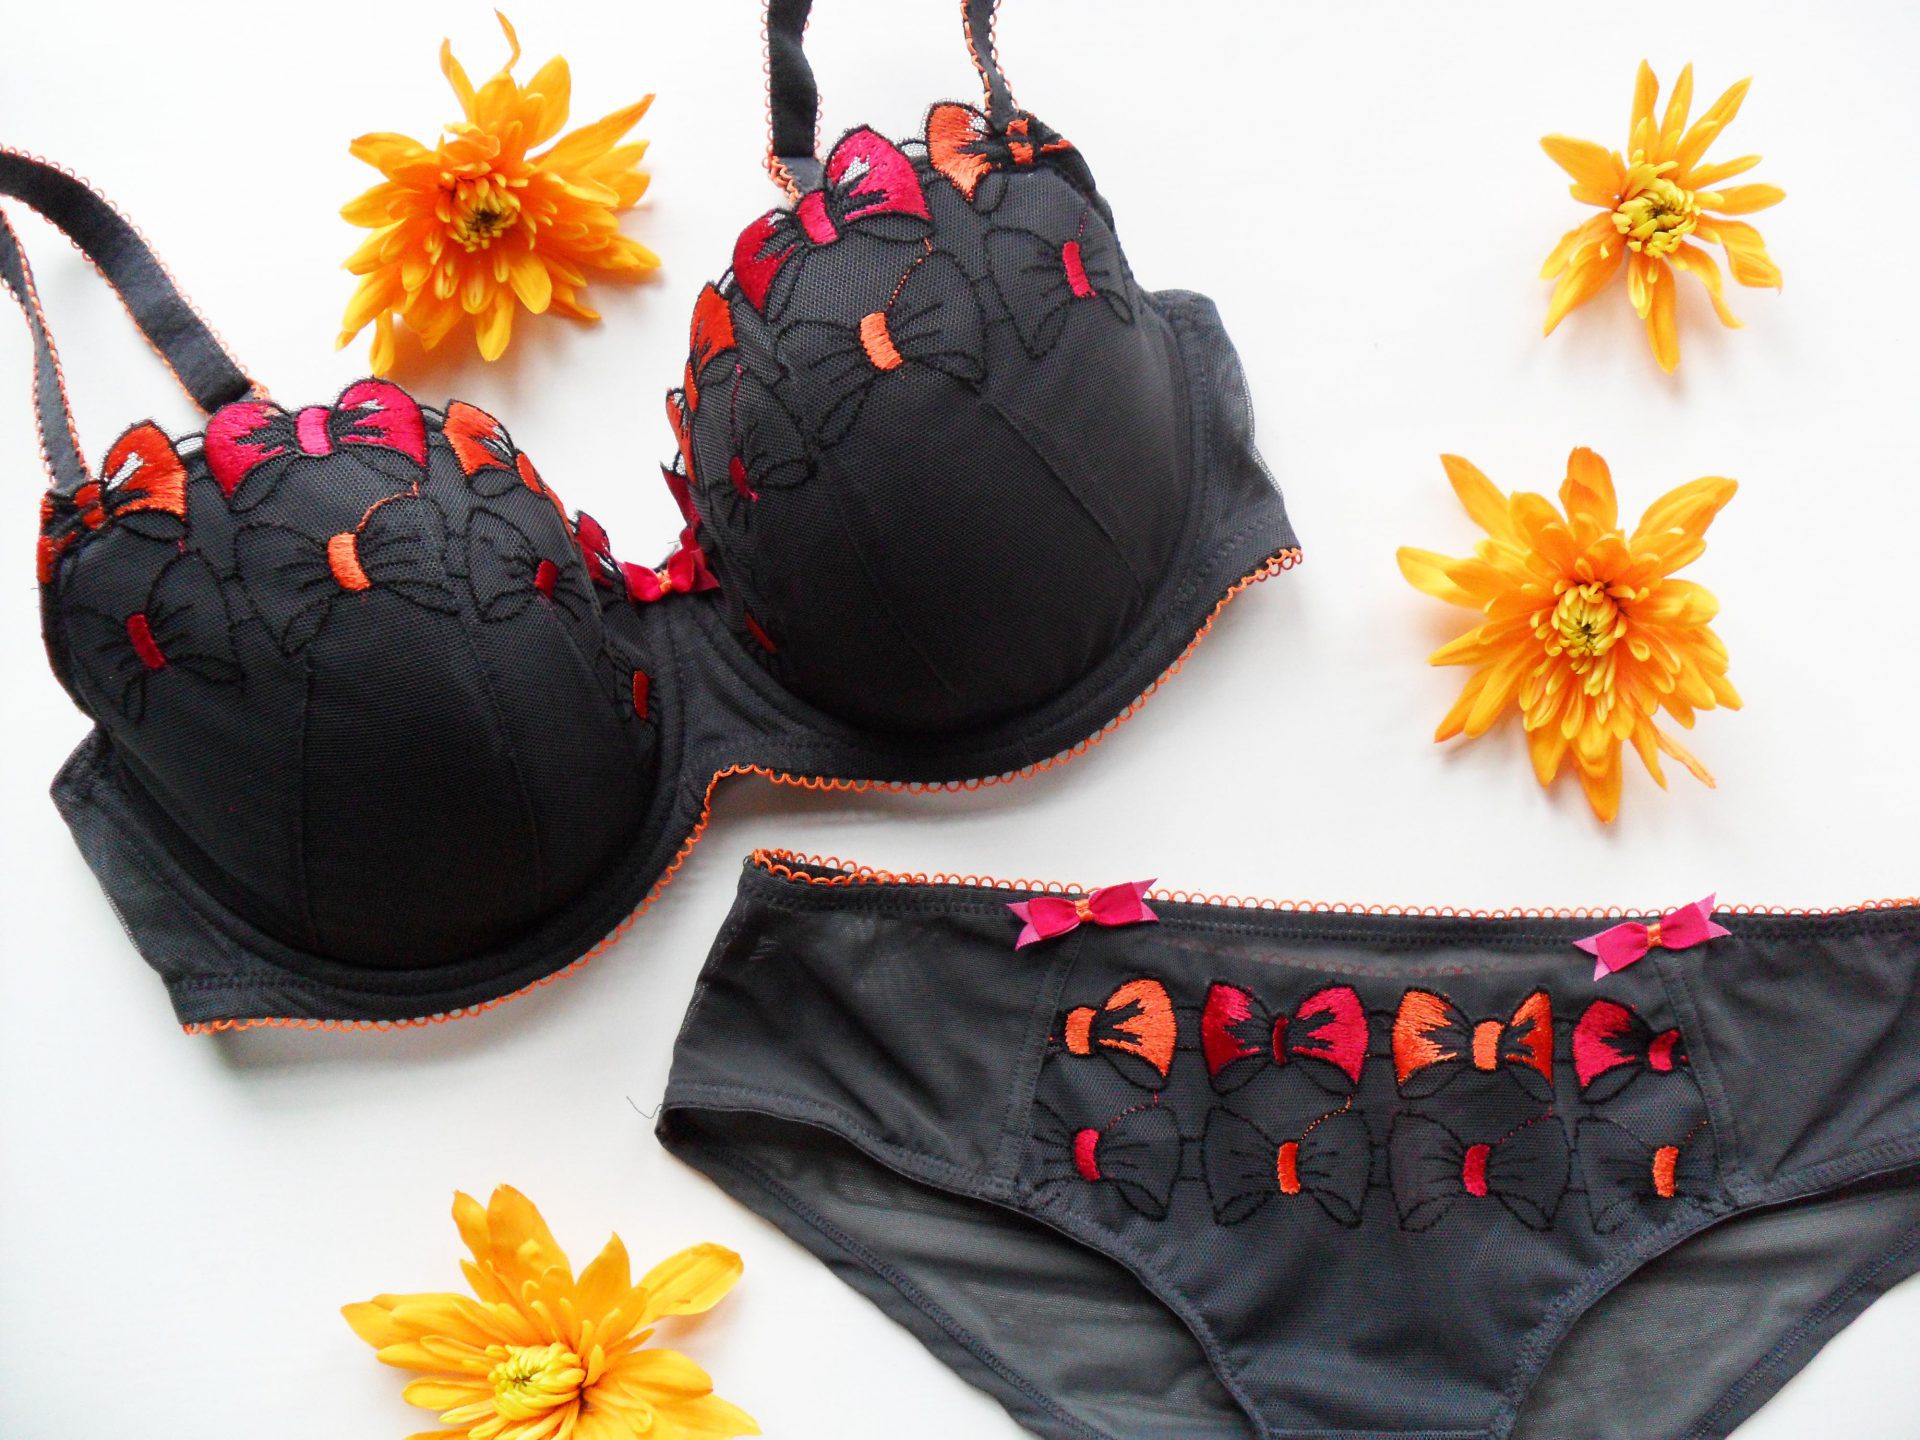 Off the Rack ~ Reviewing the Cleo By Panache “Selena” Longline Bra in 30H –